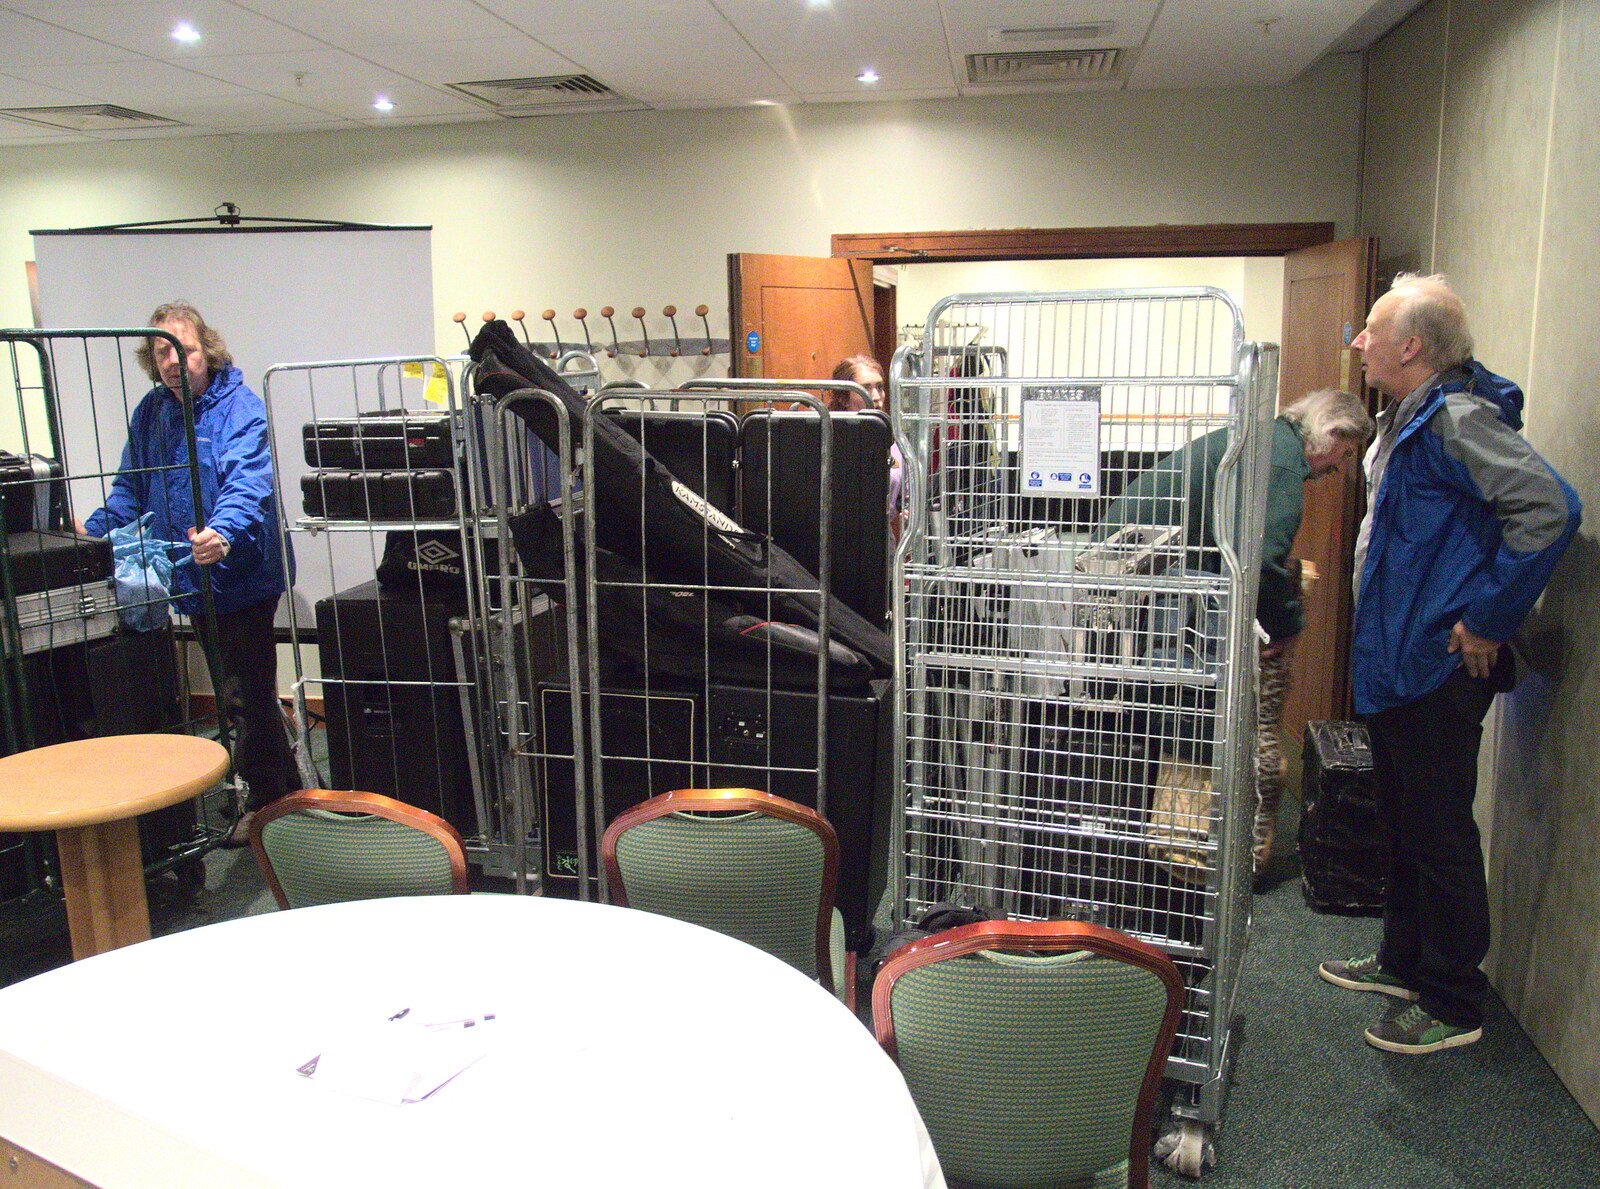 Crates of gear in the Green Room from The BBs at Centre Parcs, Elvedon, Norfolk - 5th November 2015